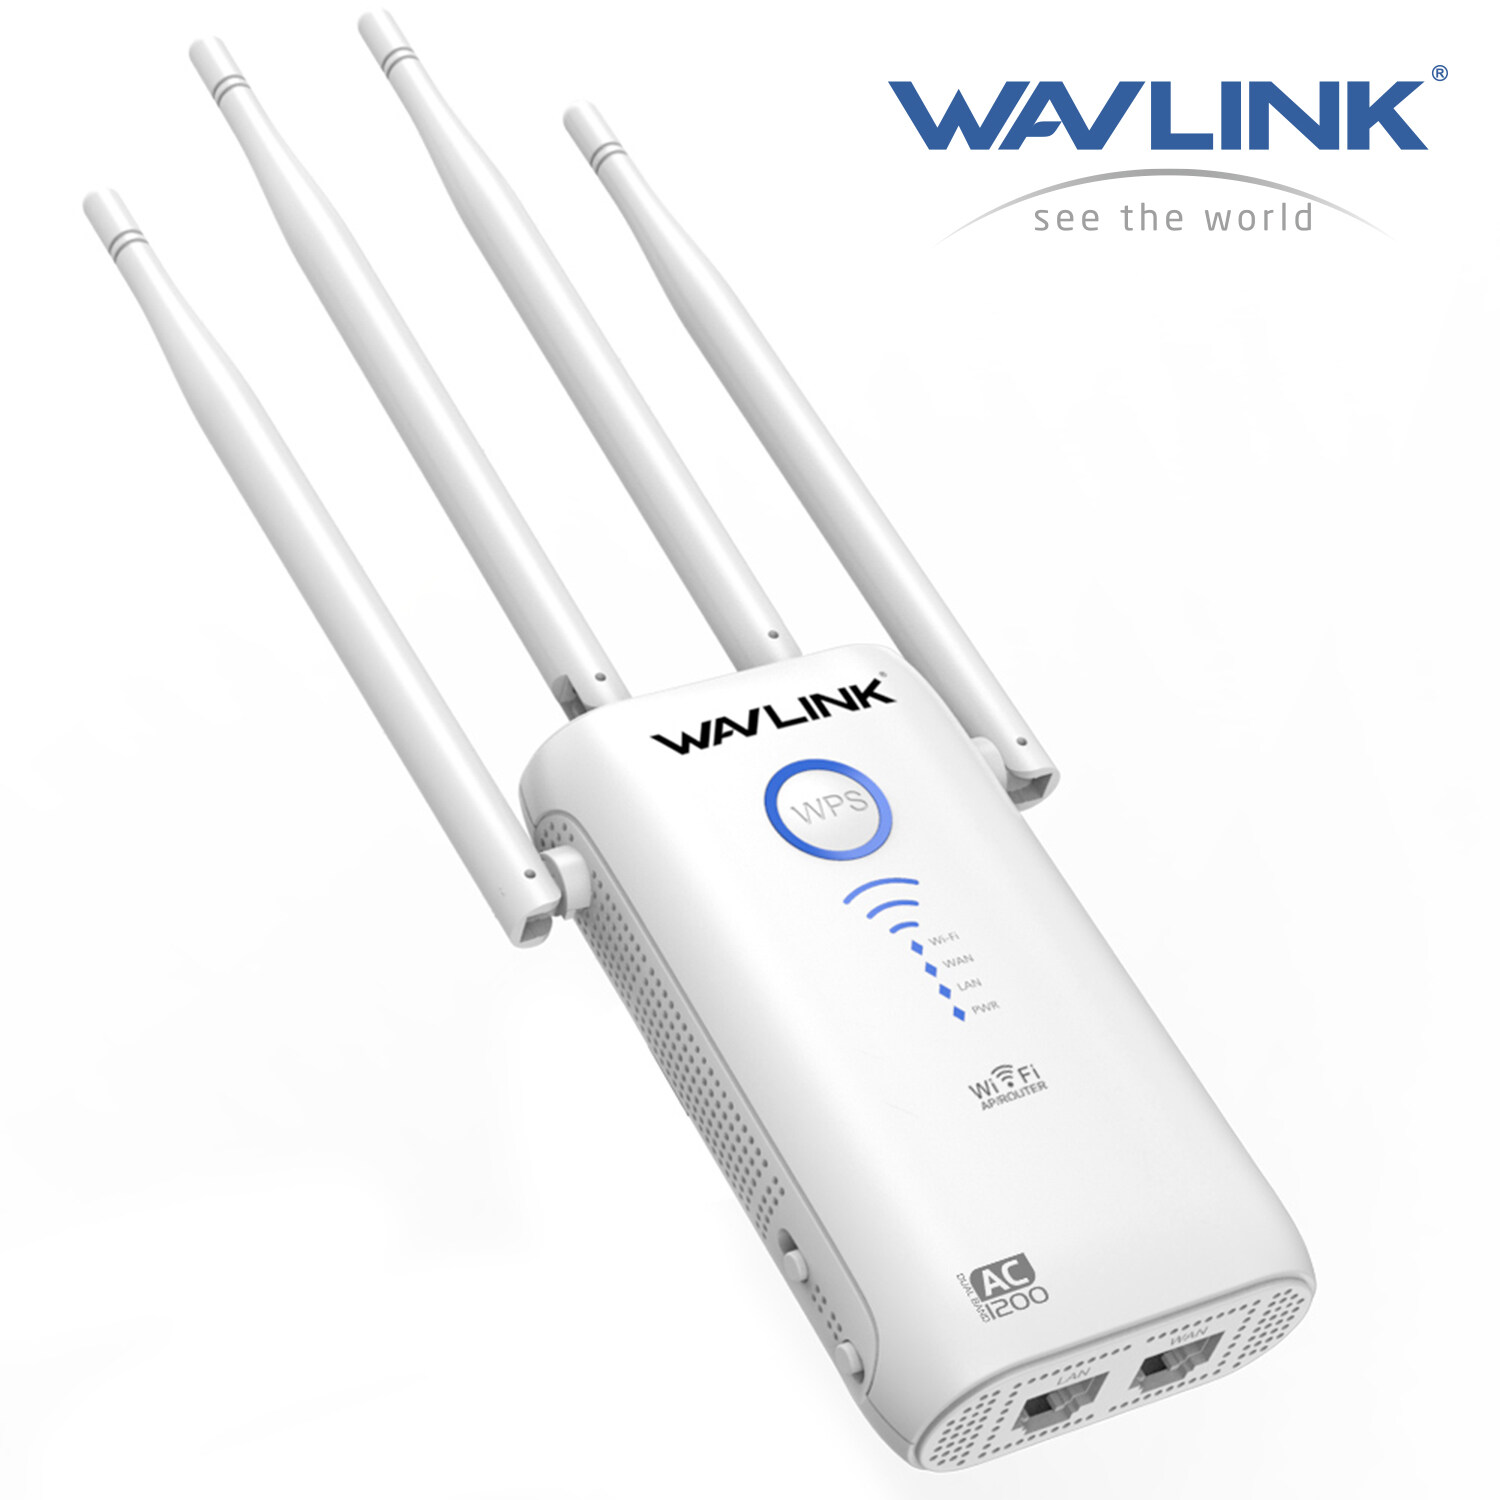 AC1200 Dual-band Wireless AP Range Extender Router with Dual Giga LAN and